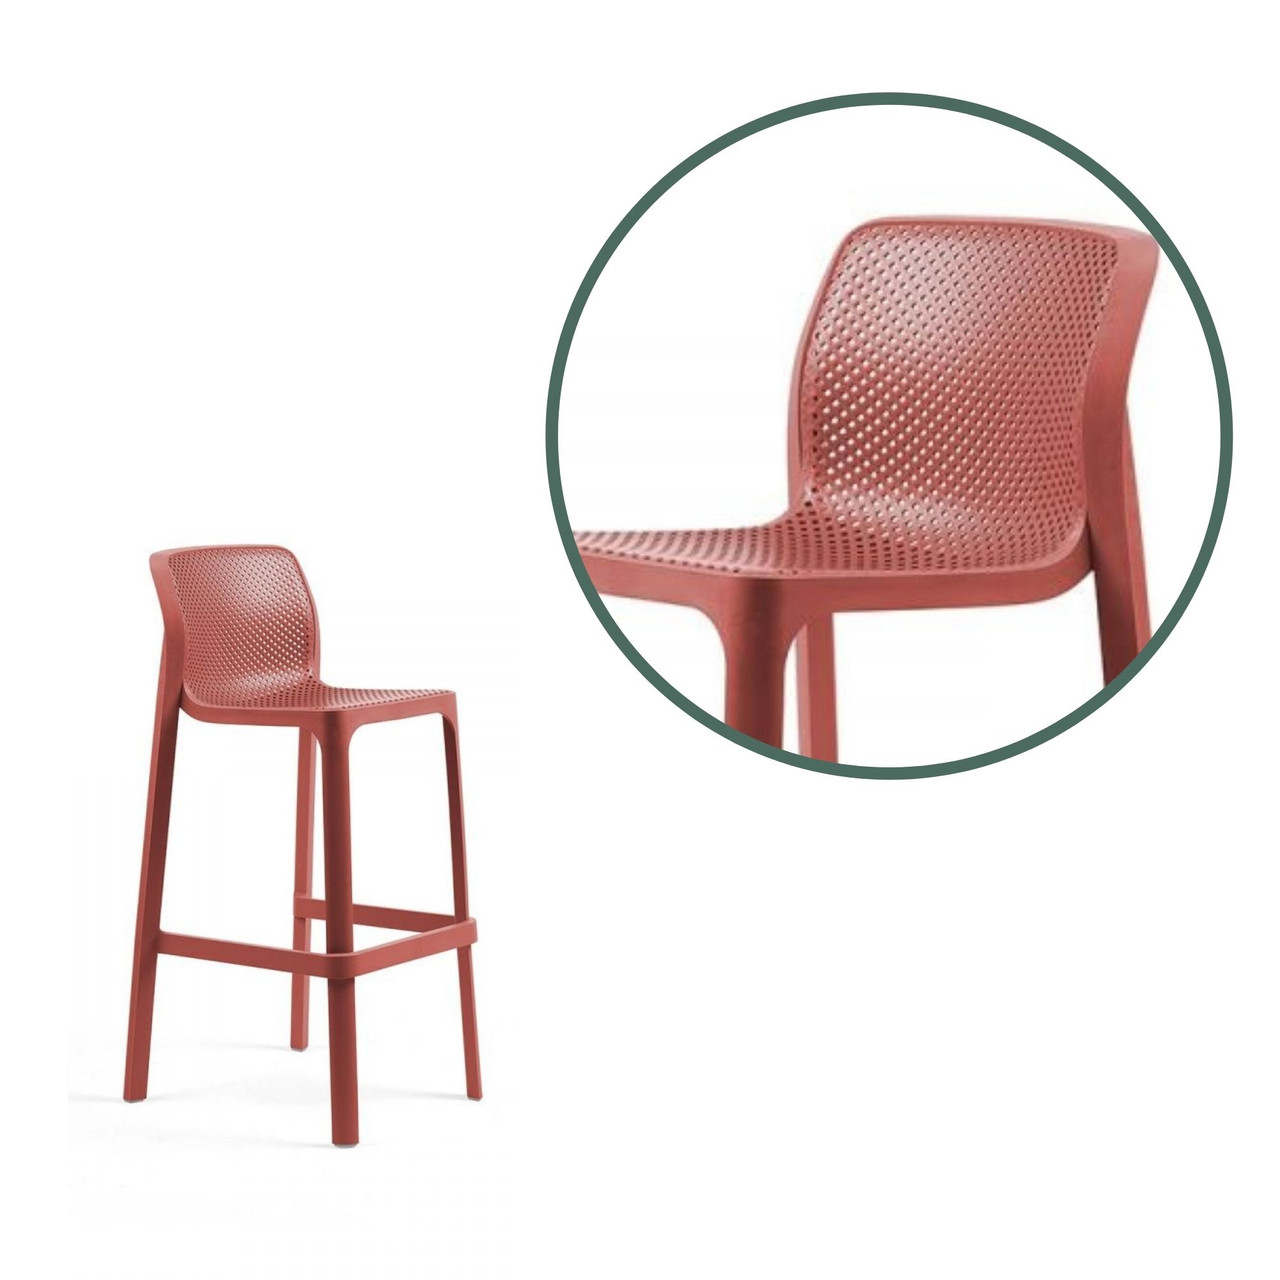 N.E.T. Barstool | Stackable Seat